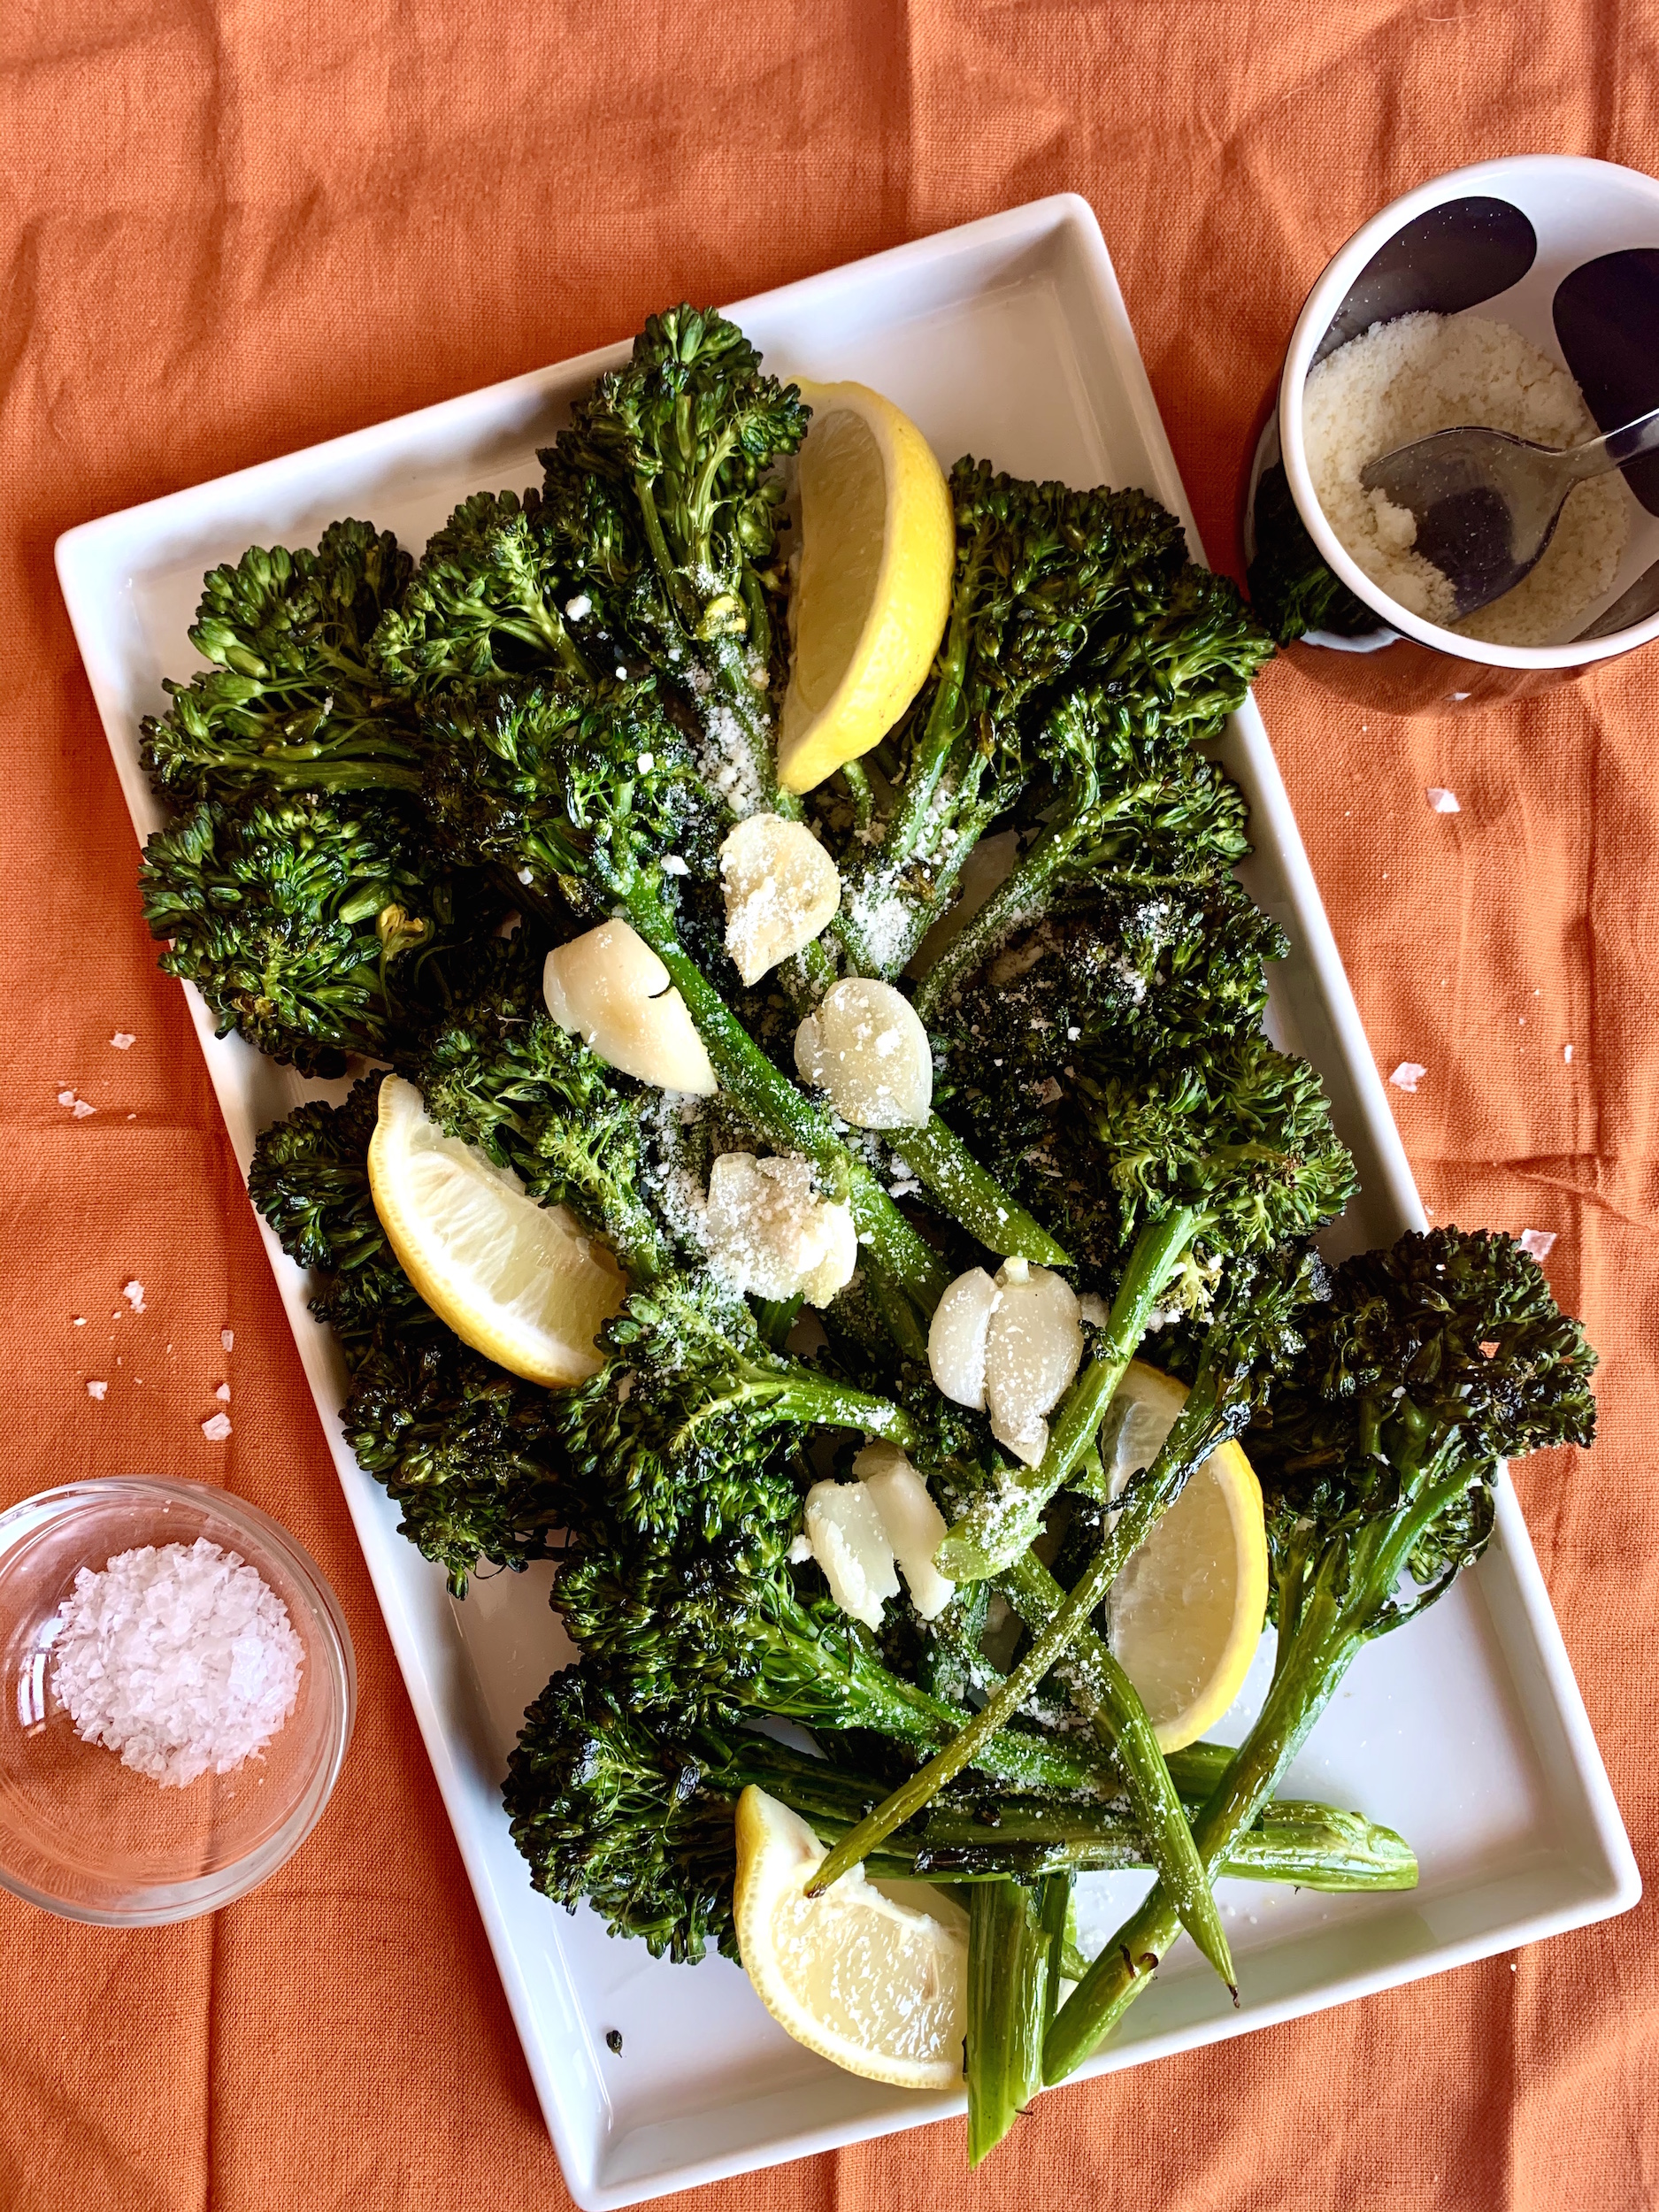 Roasted broccolini on a platter with garlic, lemon wedges and parmesan cheese.